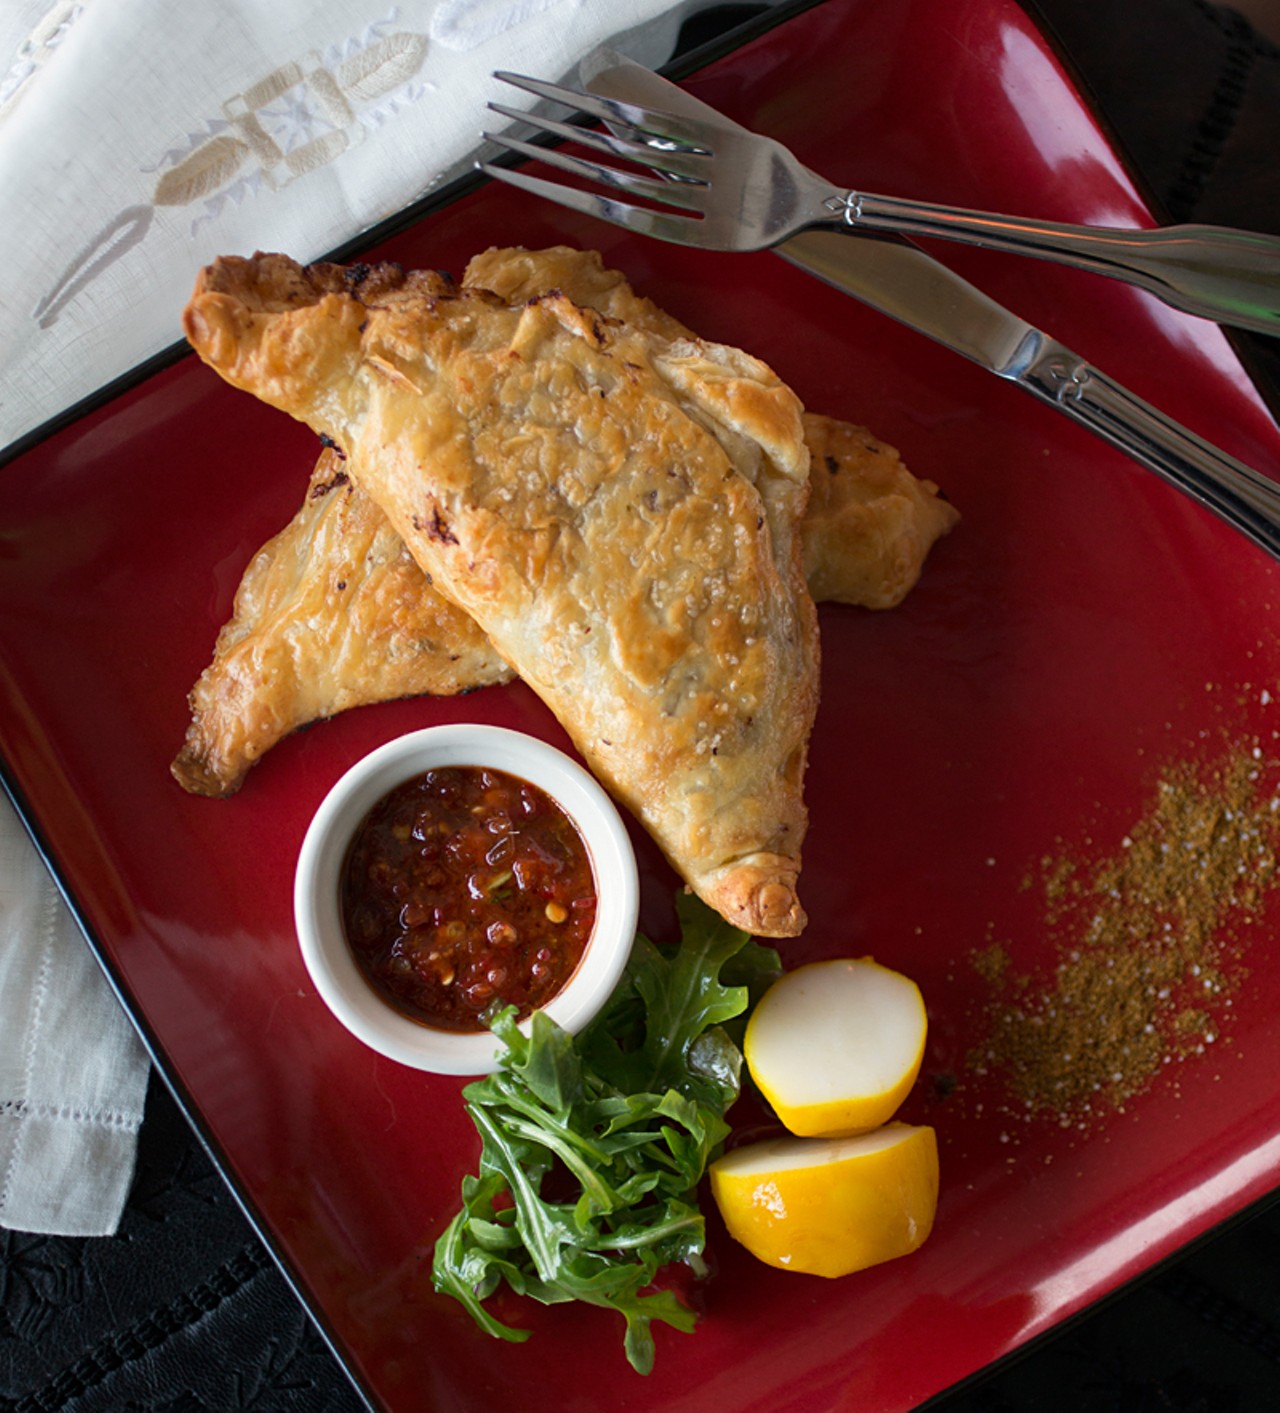 M'lwee might be Baida's signature dish: It's a flaky layered pastry stuffed with kefta (beef), garlic, cumin, coriander, herbs and other spices, then pan-fried. M'lwee is served with harissa on the side.